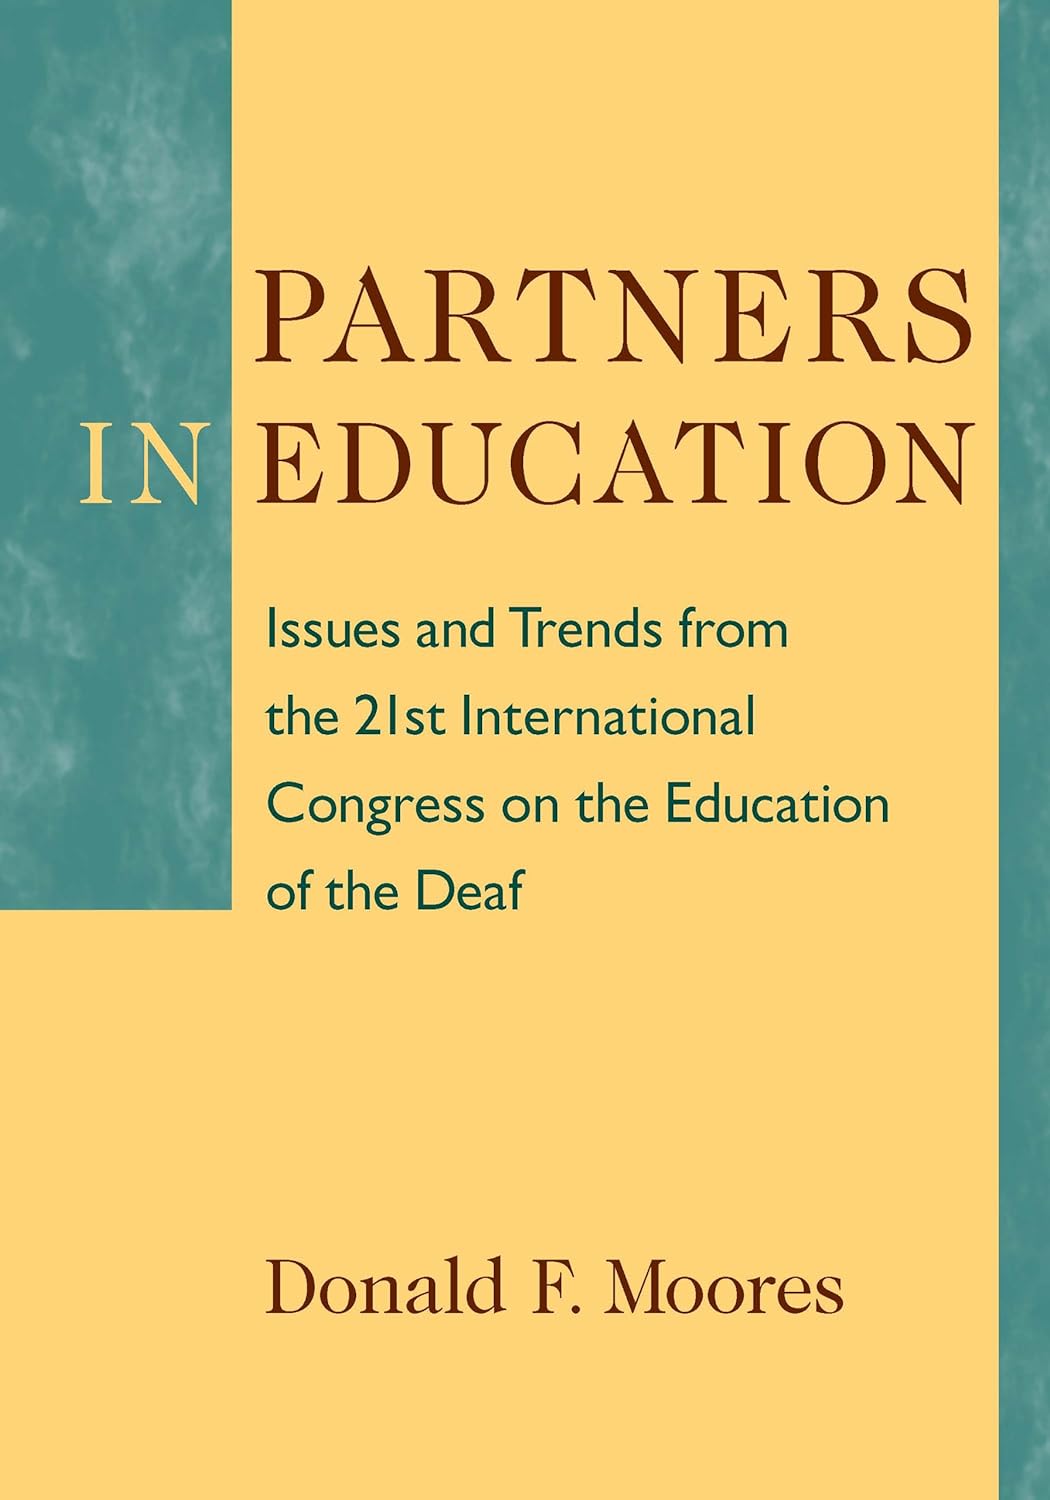 The cover of the book "Partners in Education: Issues and Trends from the 21st International Congress on the Education of the Deaf" features a yellow and green back with the title at the top. The author's name, Donald F. Moores, apears at the bottom.